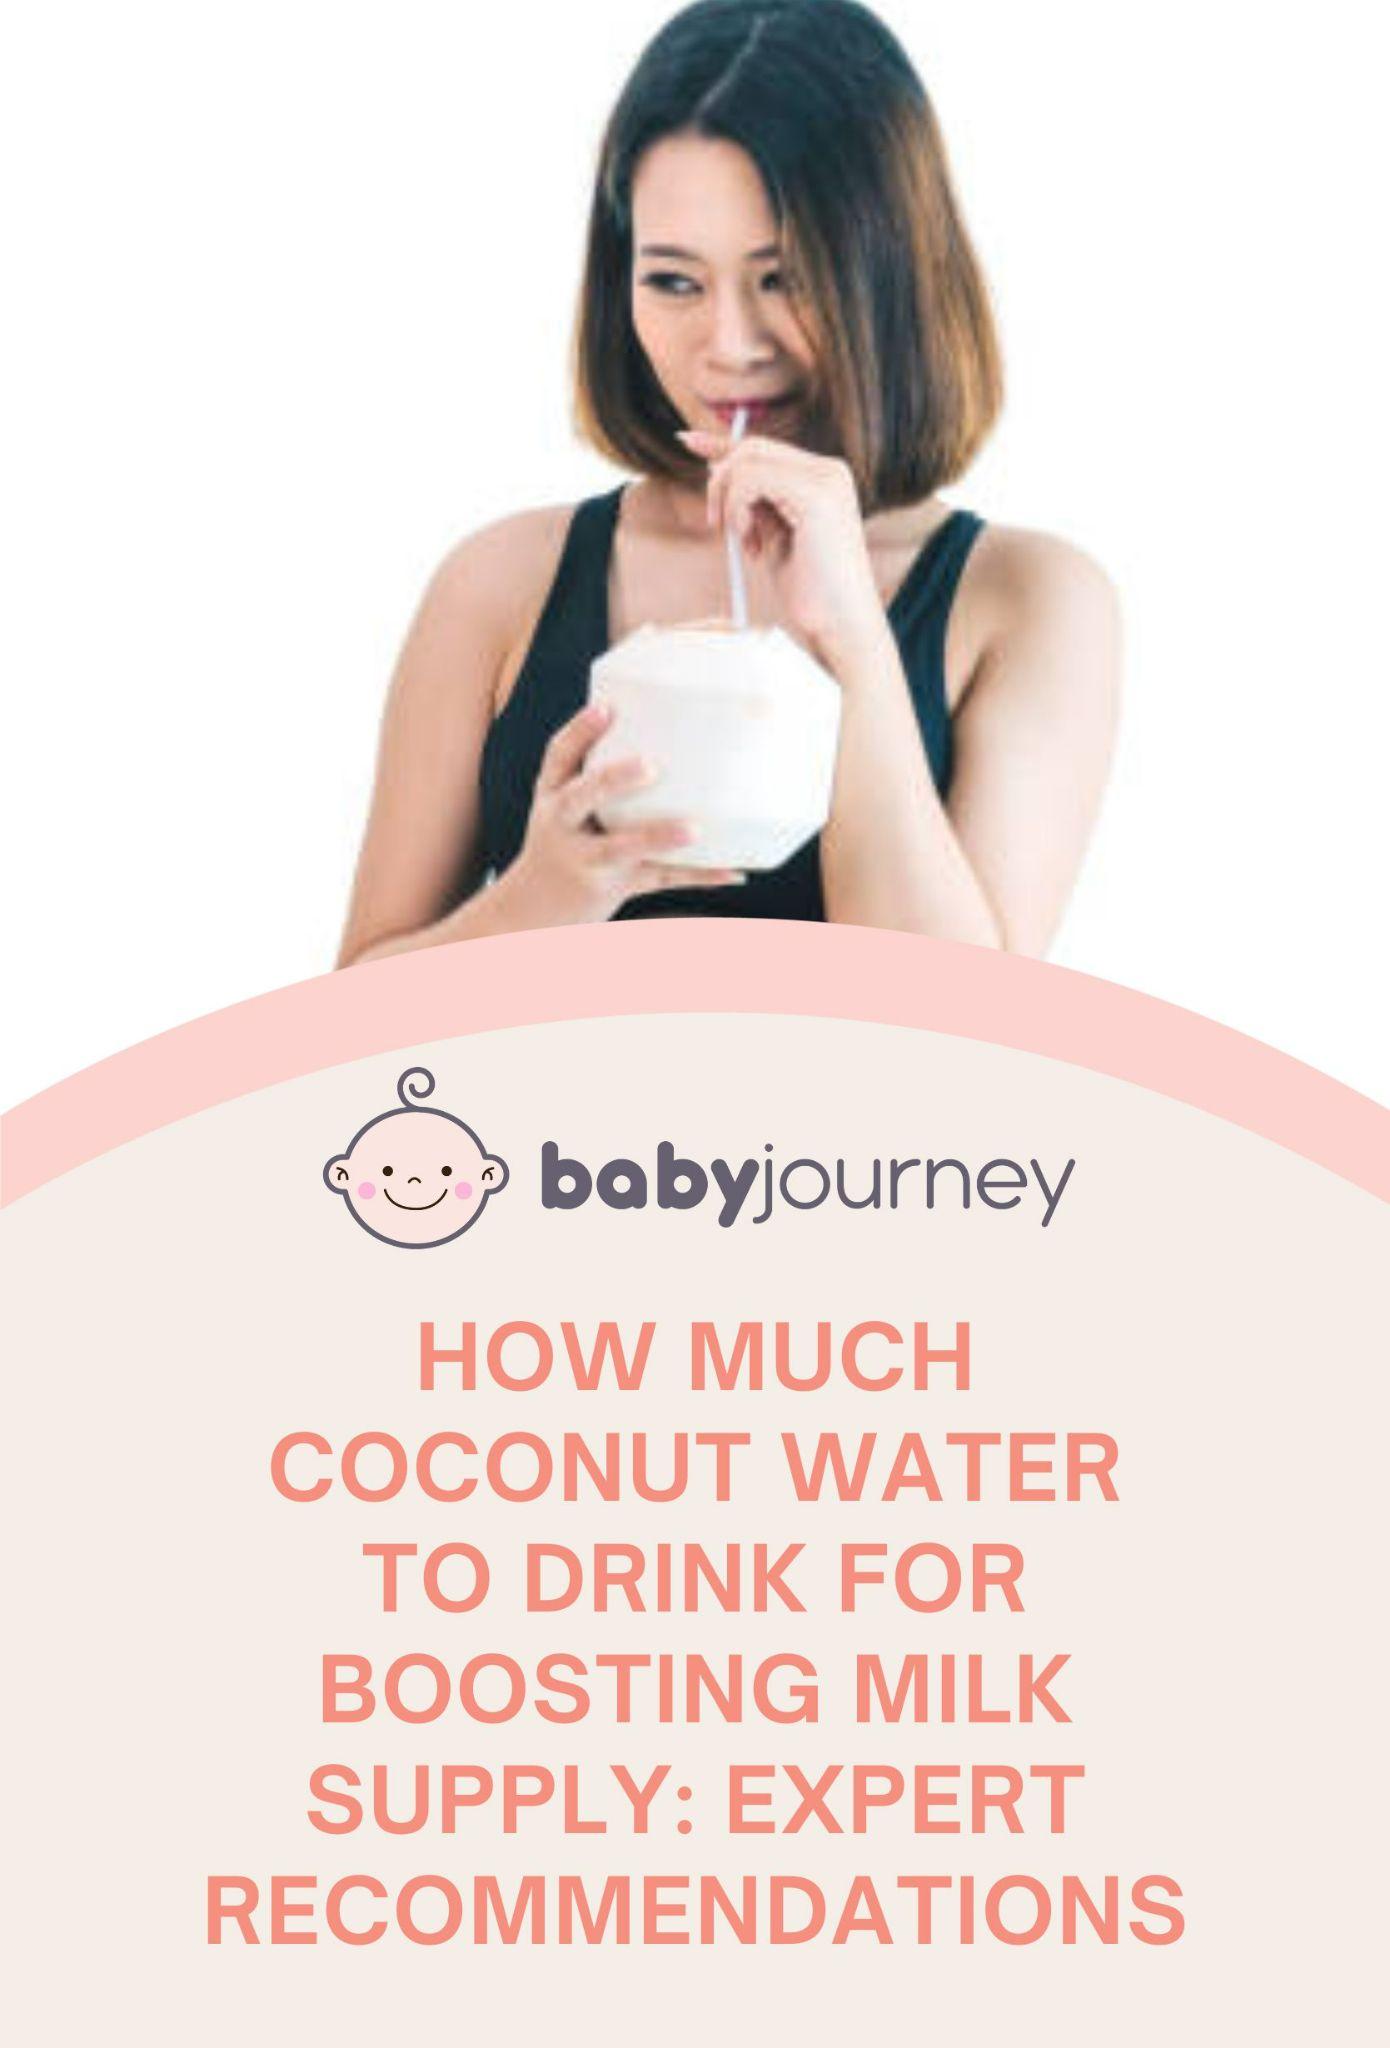 How Much Coconut Water Should I Drink To Boost Milk Supply: Expert Recommendations Pinterest Image - Baby Journey